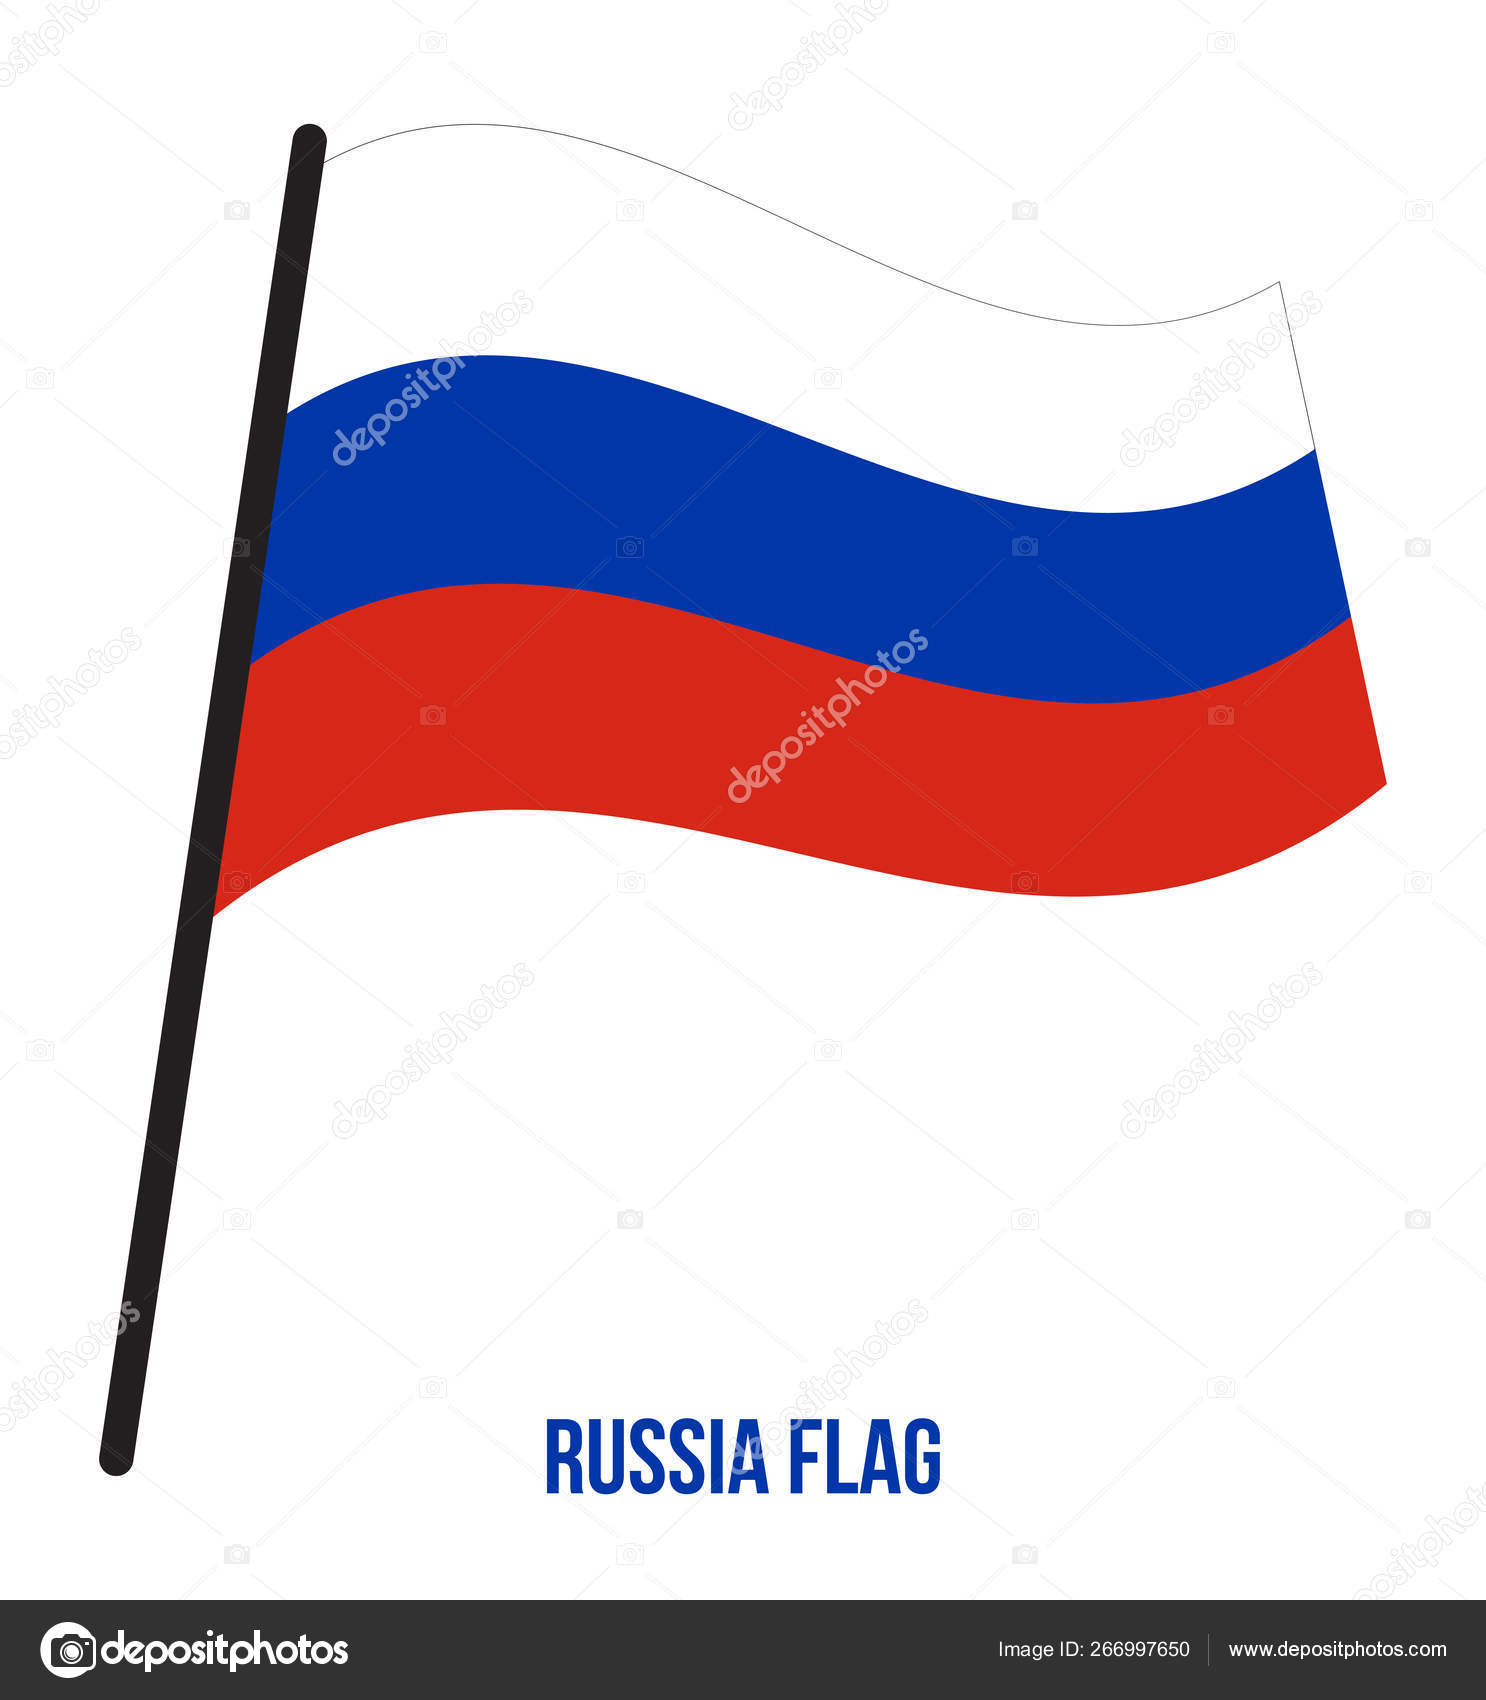 Flag with flagpole. Illustration of flag of Russia